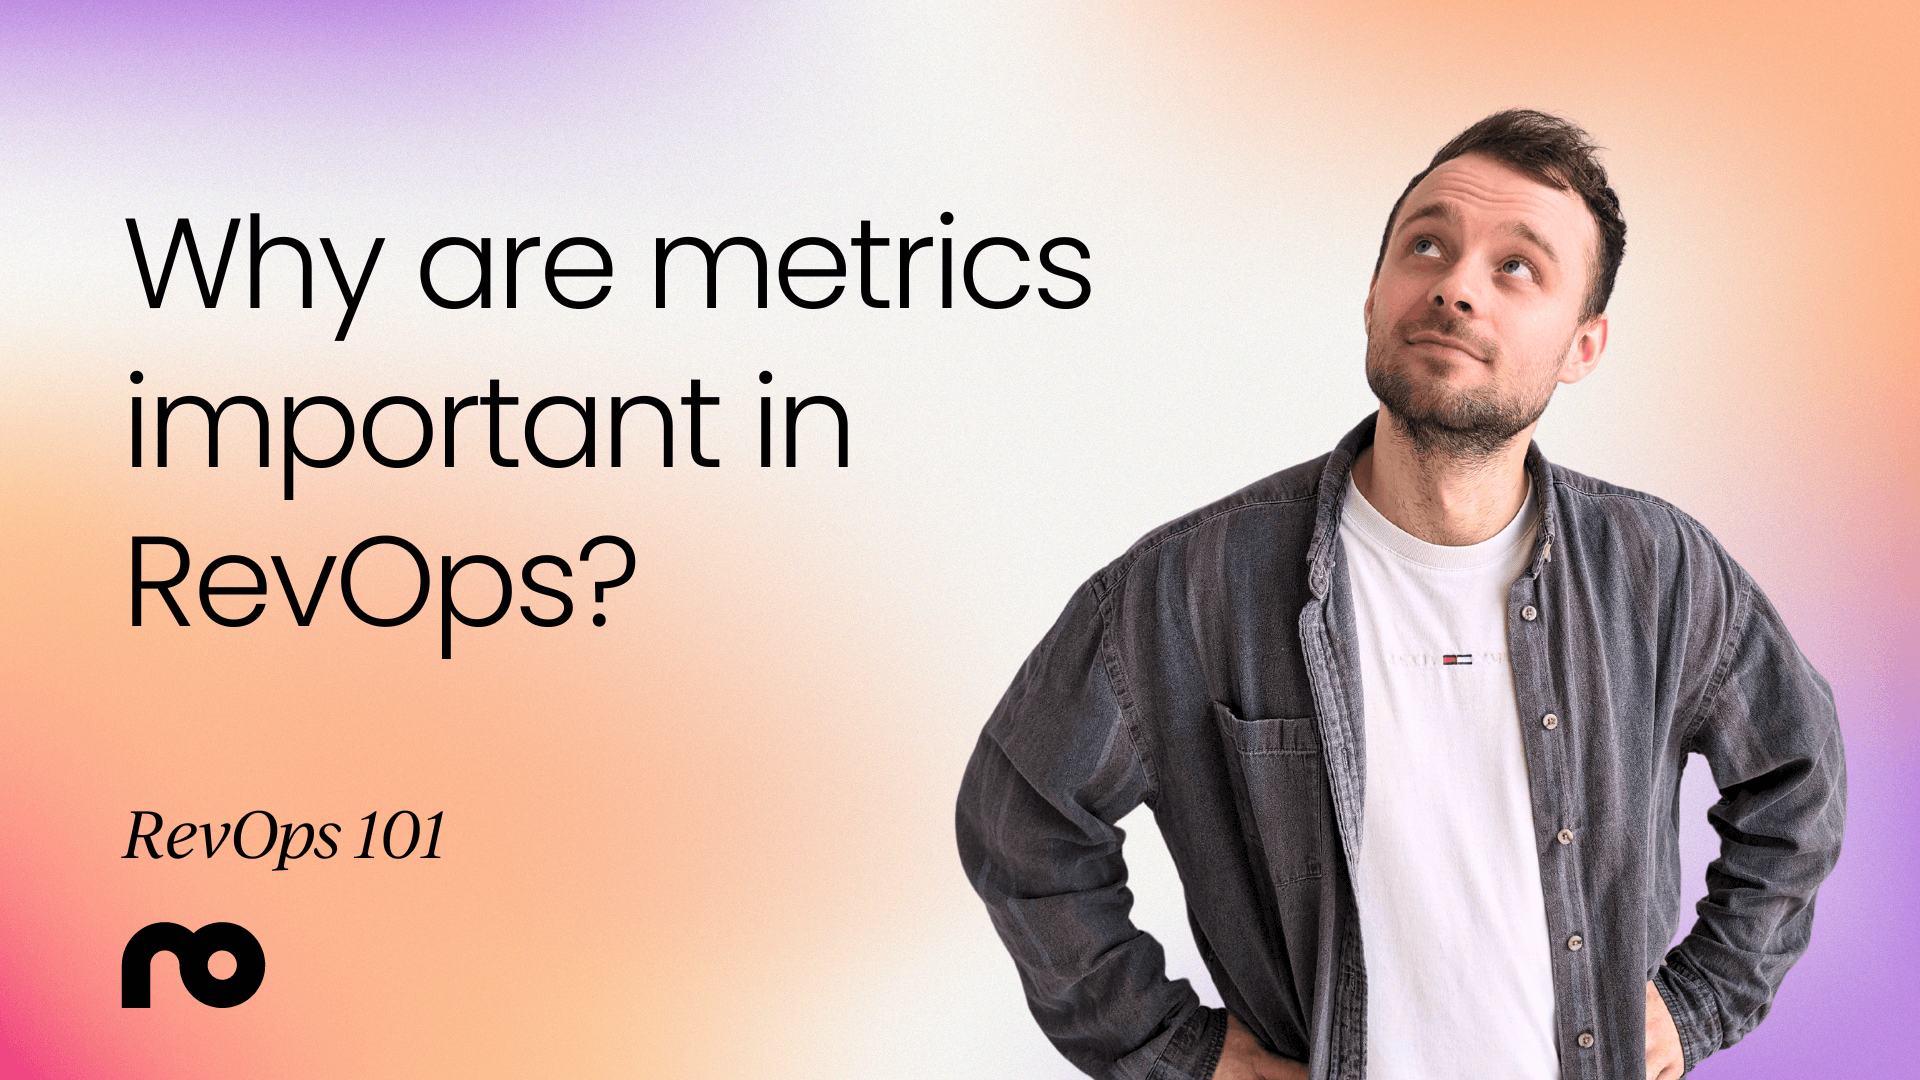 Why are RevOps metrics important?